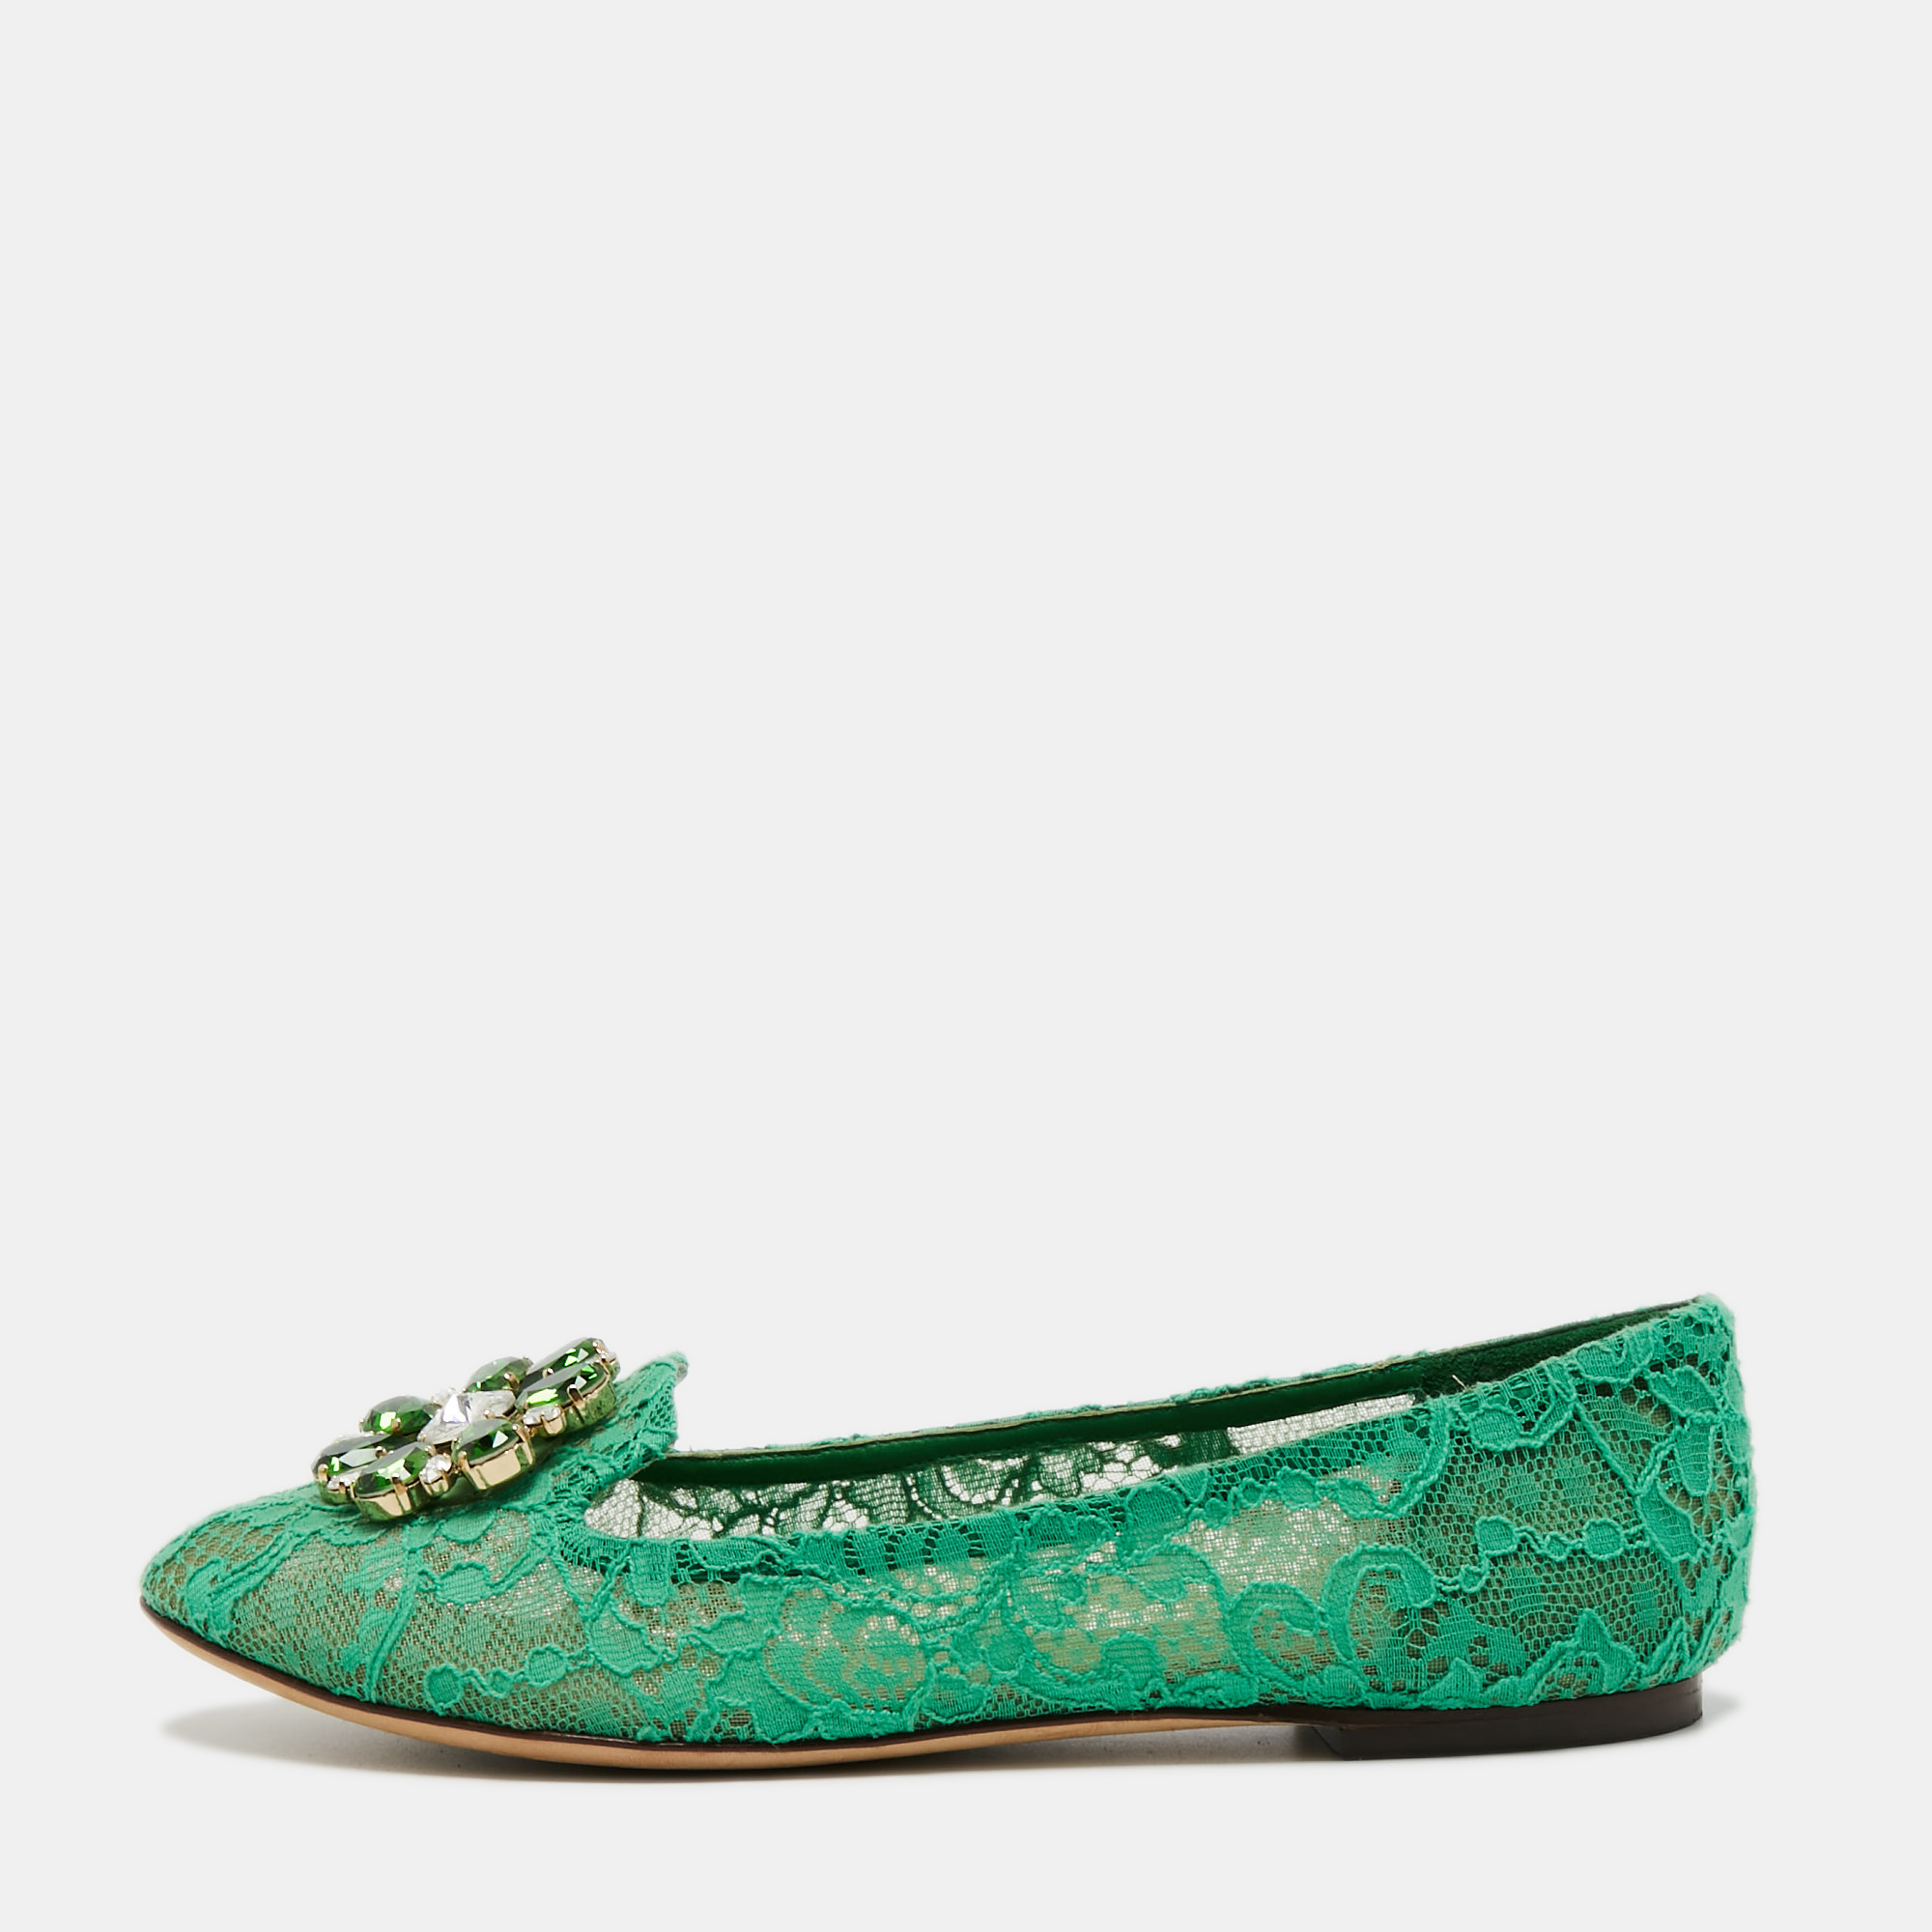 Pre-owned Dolce & Gabbana Green Lace Crystal Embellished Taormina Ballet Flats Size 40